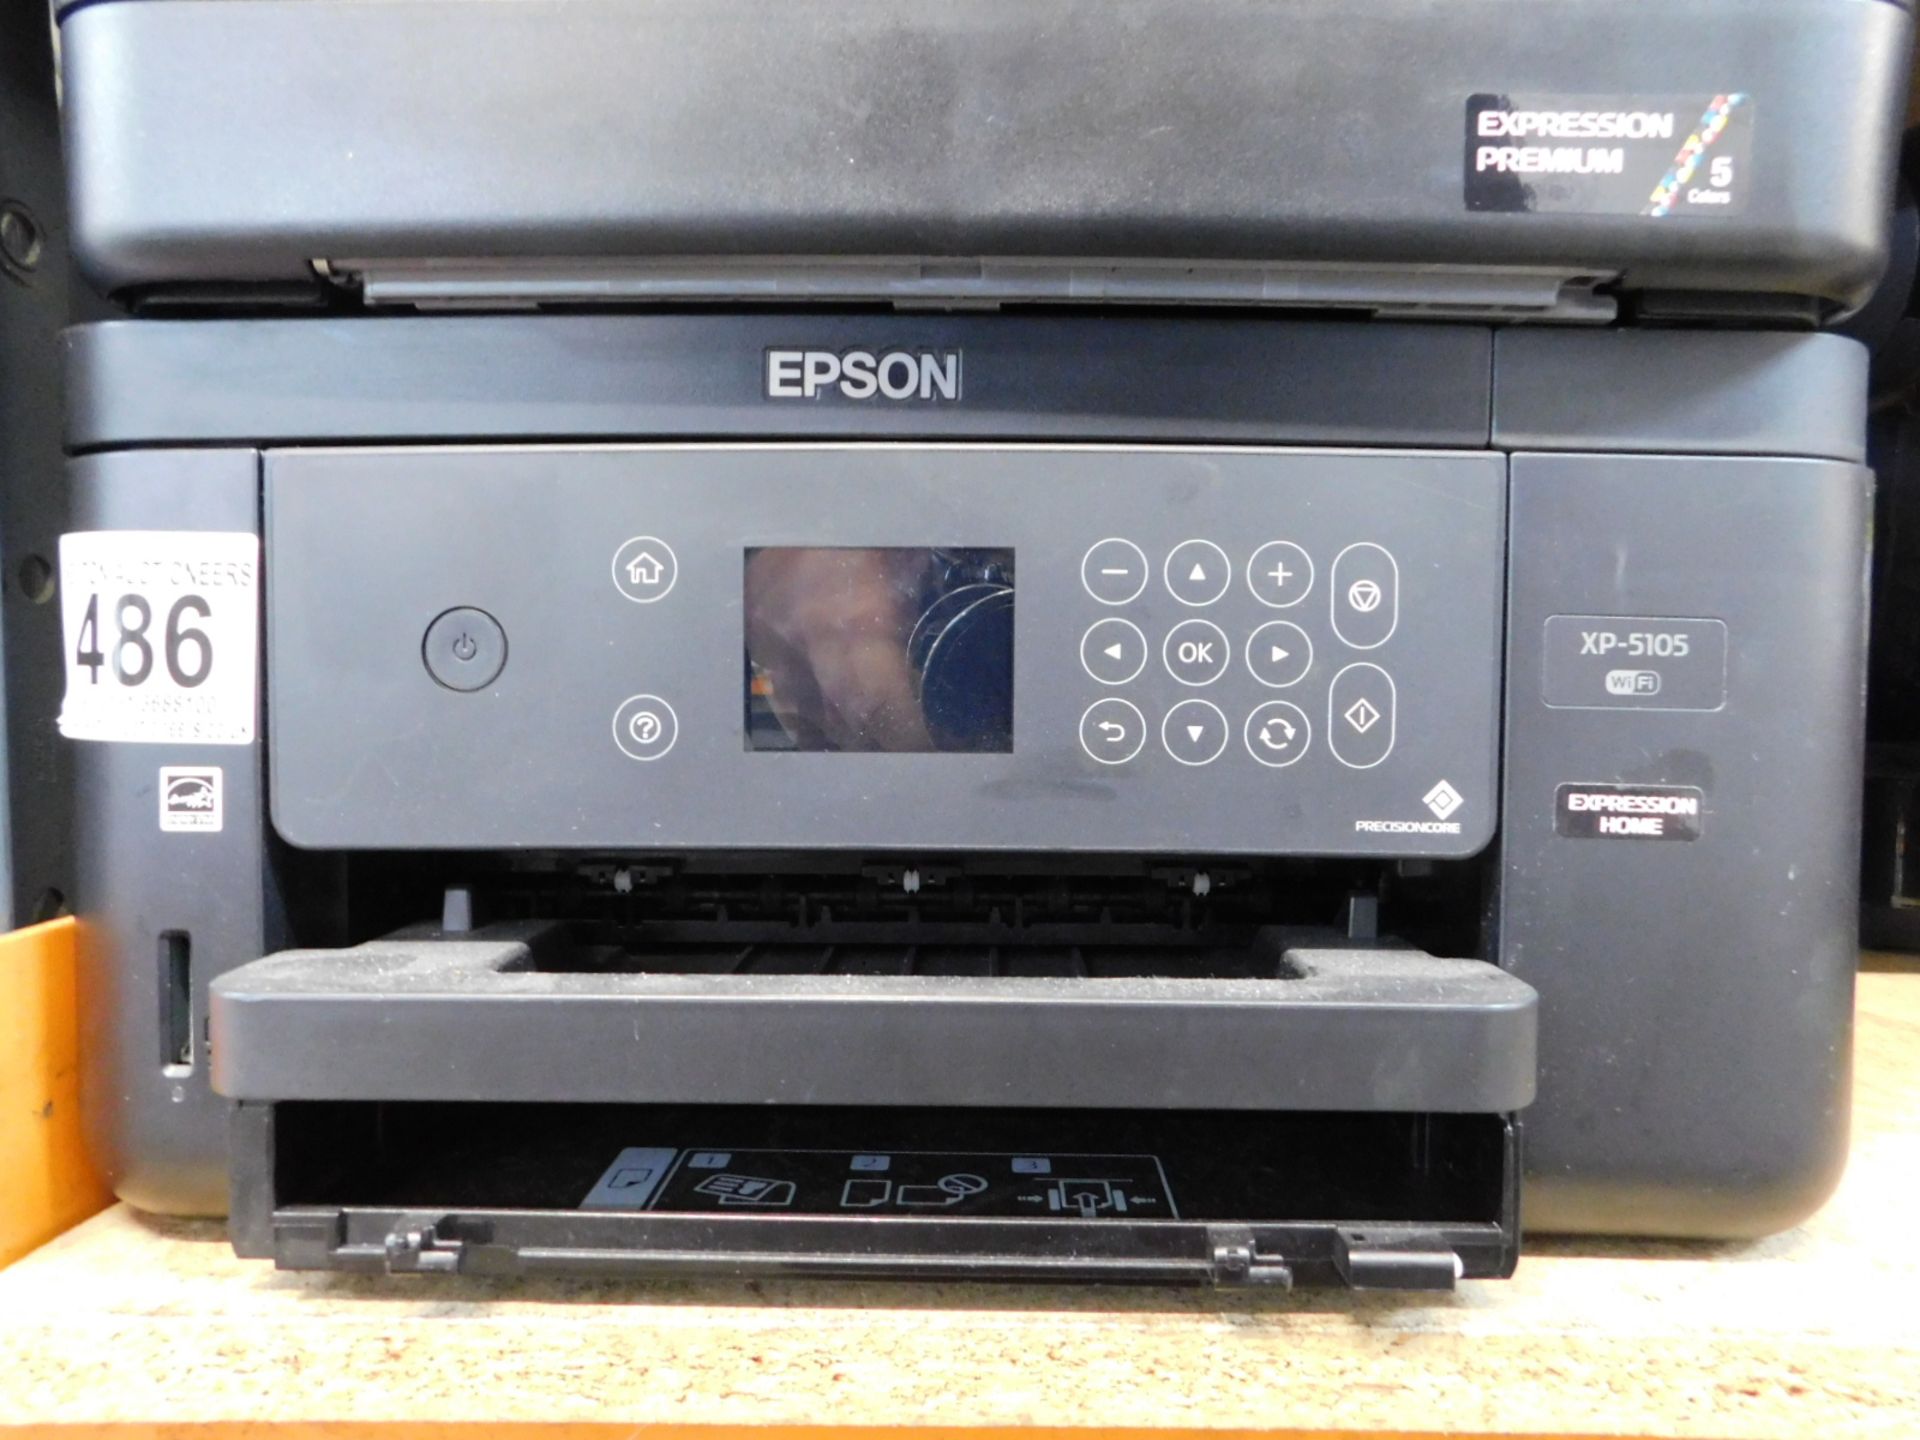 1 EPSON EXPRESSION HOME XP-5105 ALL IN ONE PRINTER RRP Â£149